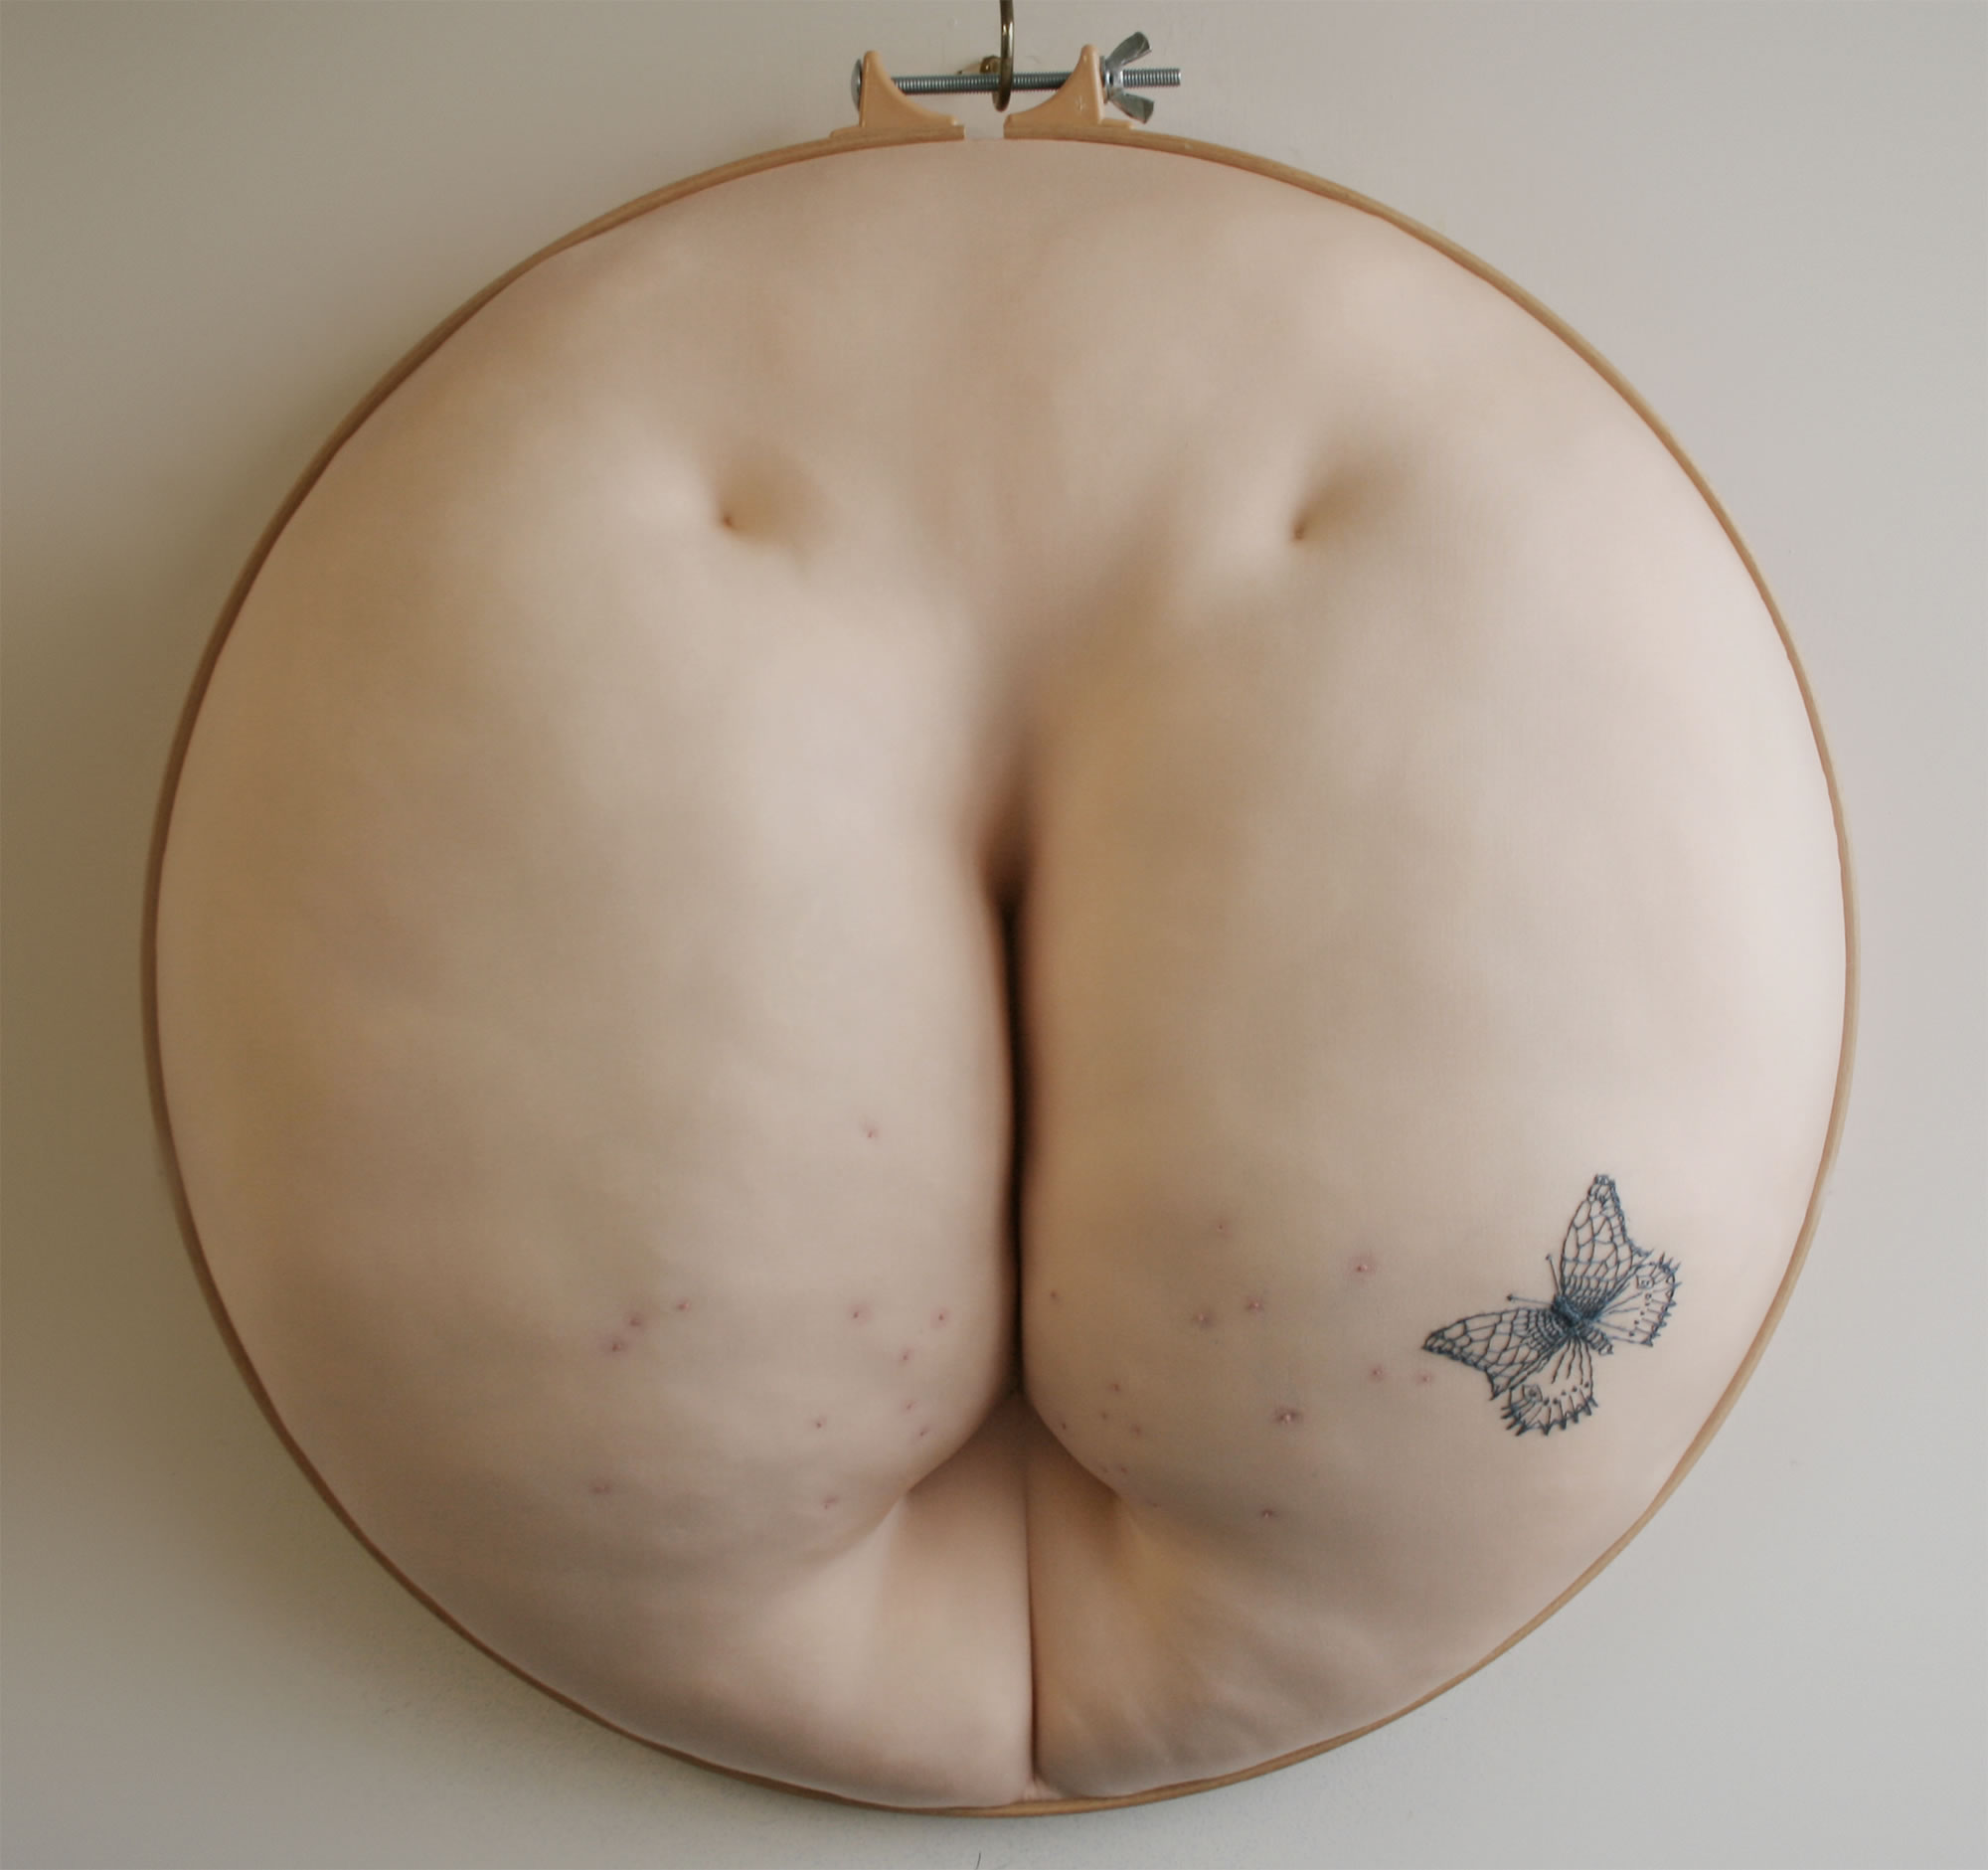 buttocks with pimples, Embroidery sculpture by Sally Hewett